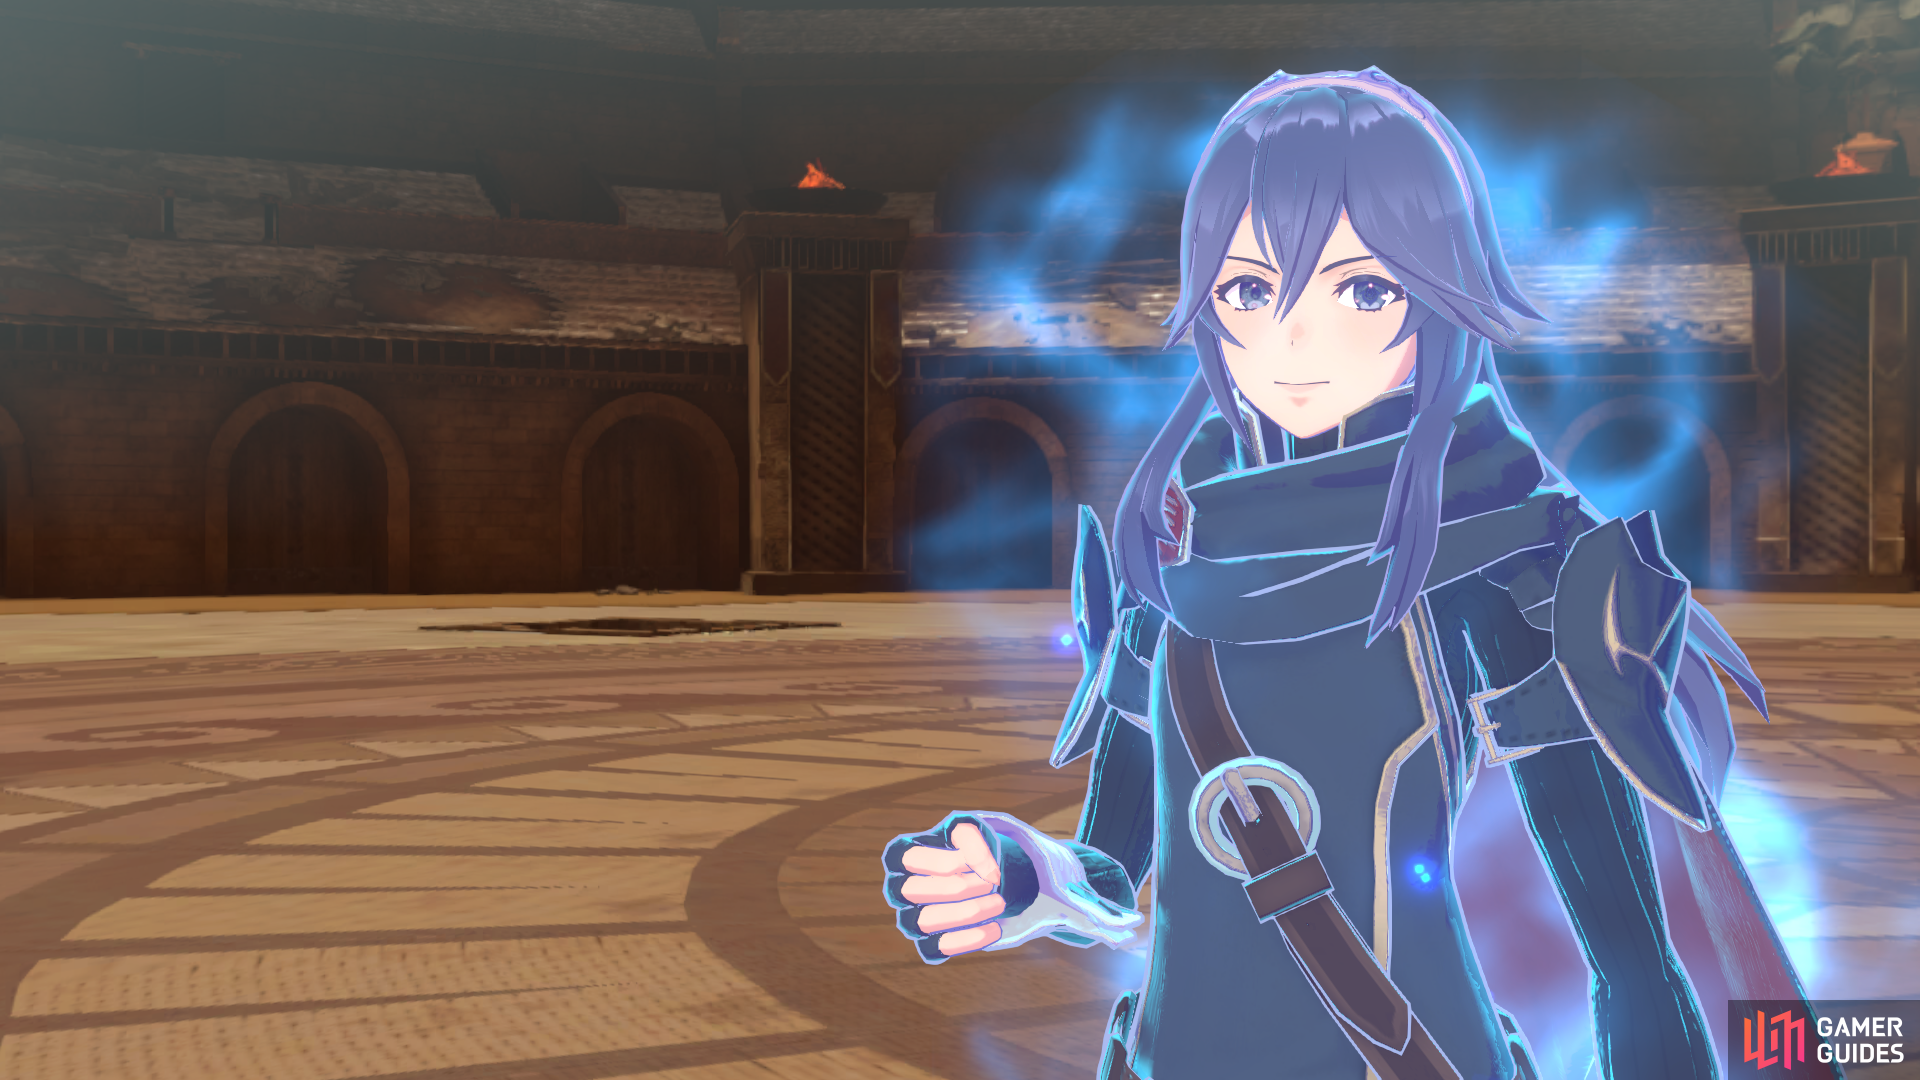 Lucina in her Paralogue Chapter.